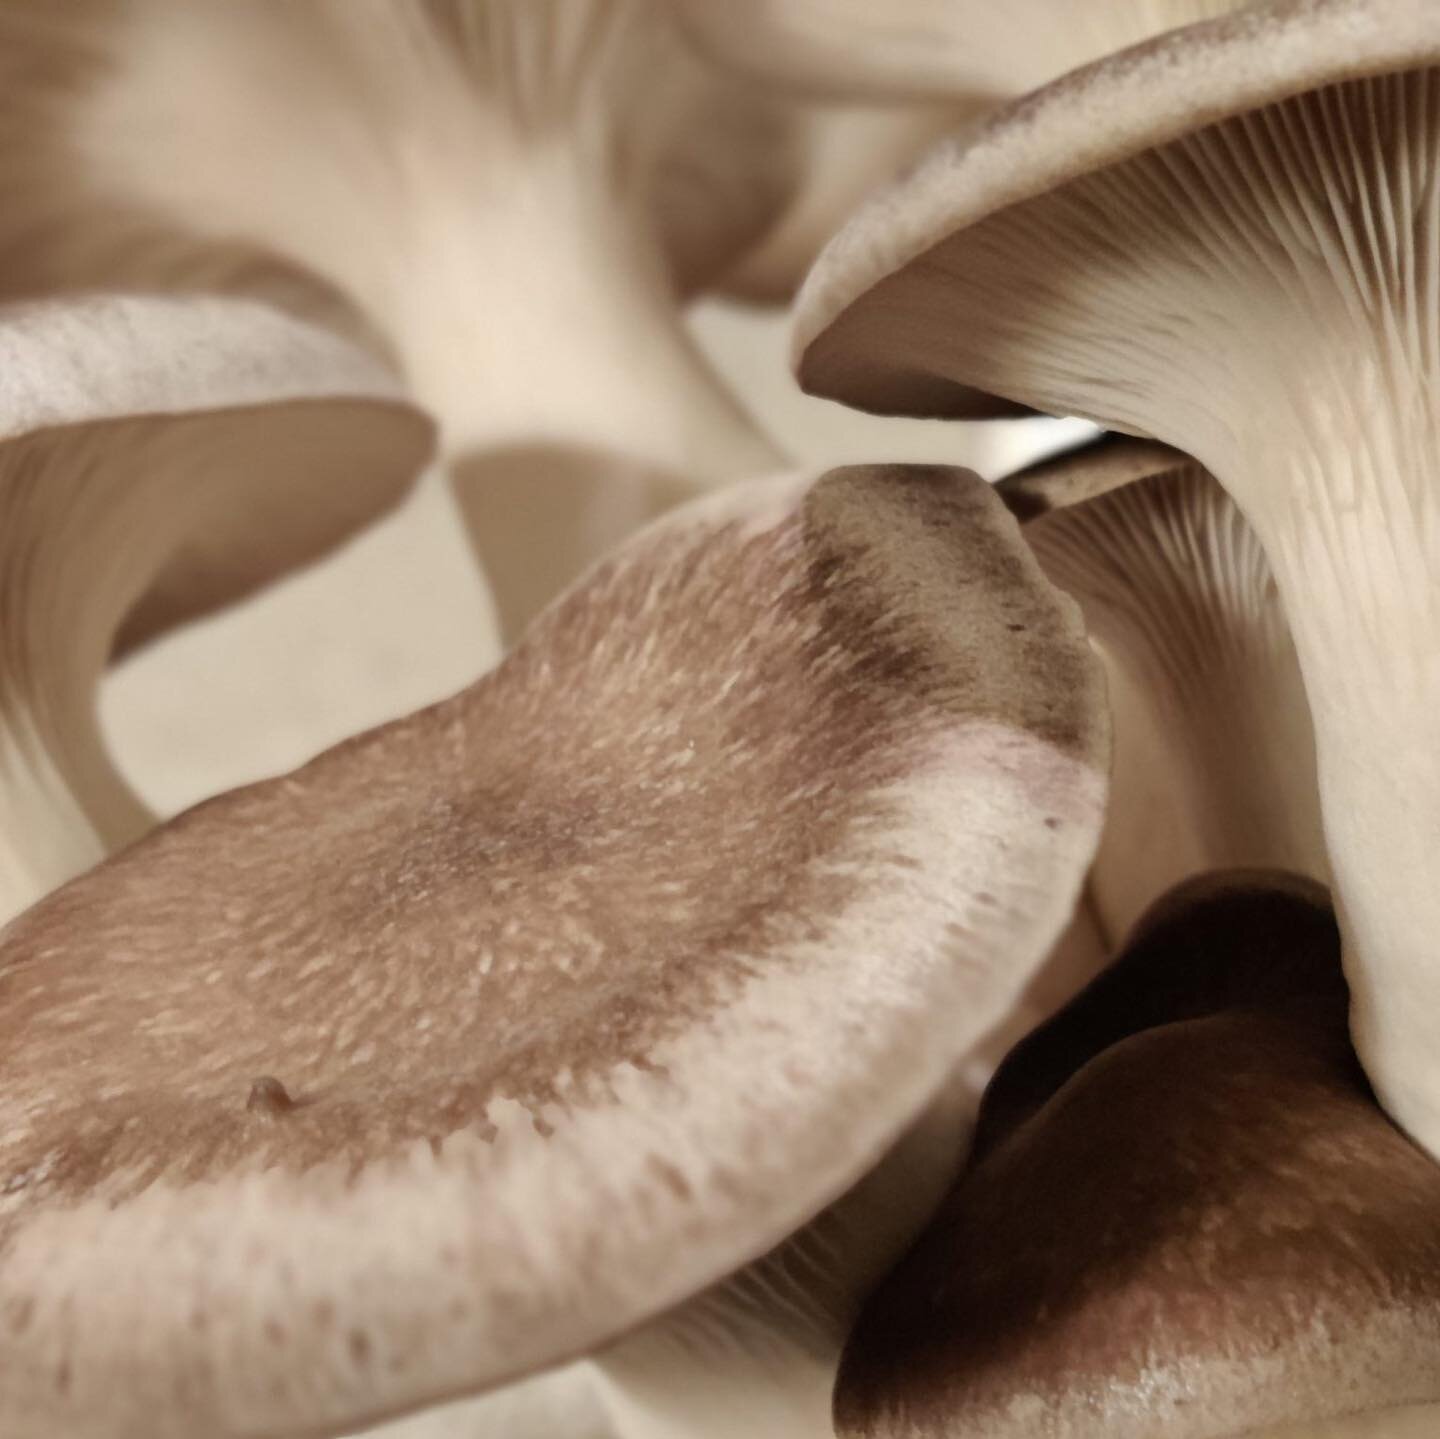 Black Pearl Oyster mushrooms are a hybrid oyster mushroom that combines the robust flavor of regular oyster mushrooms and the firm texture of king oysters. 🍄

They make a really great replacement for anyone wanting to incorporate more meat-free meal